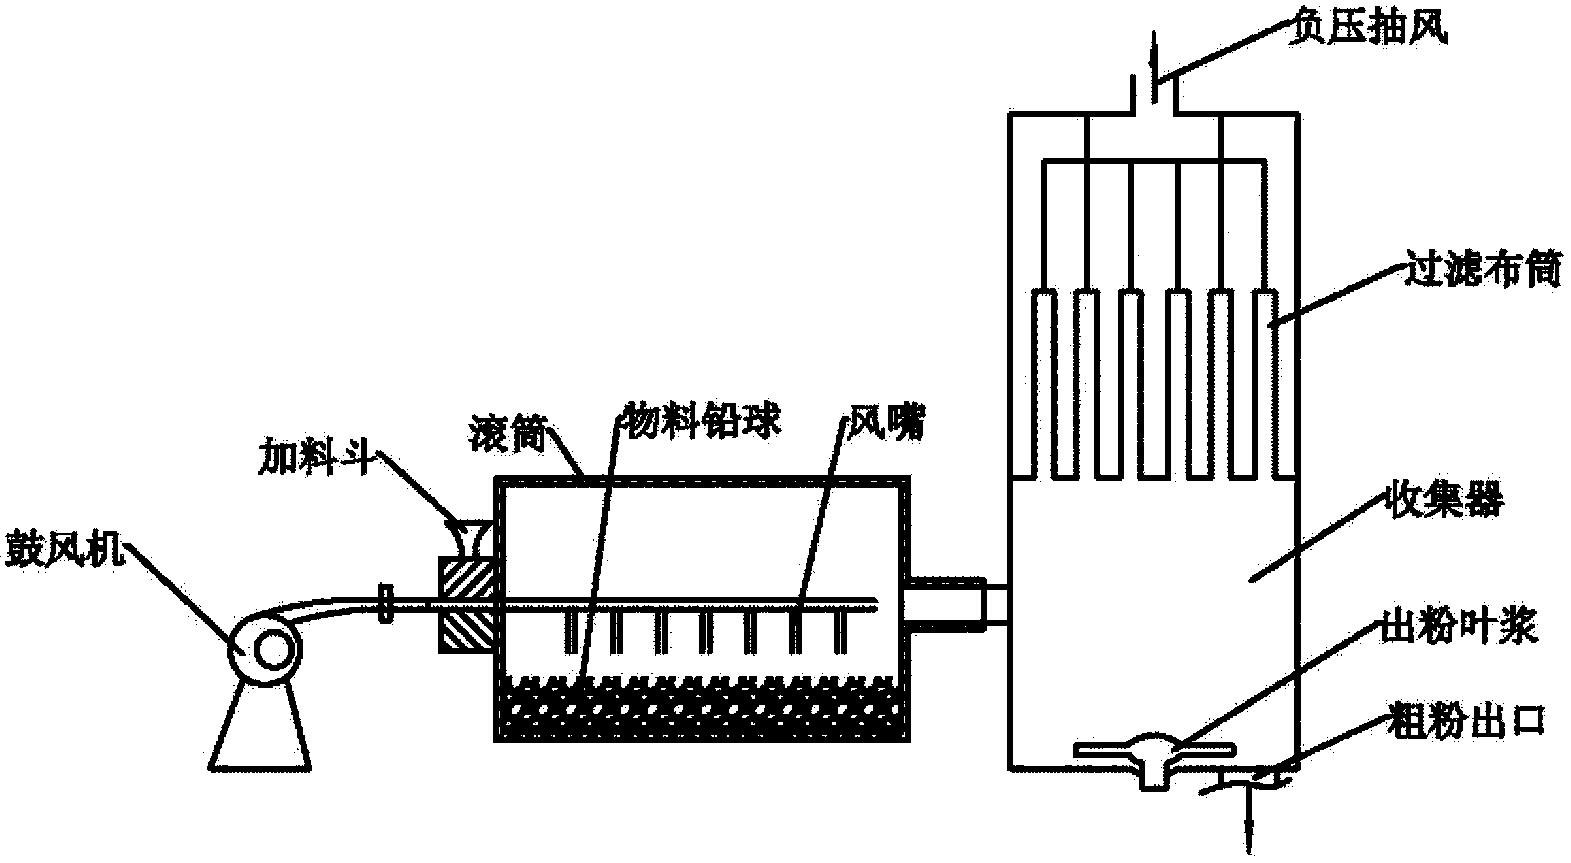 Methods and equipment for recovering waste diachylon by wet method and manufacturing electrode active material of high performance lead acid battery by wet method